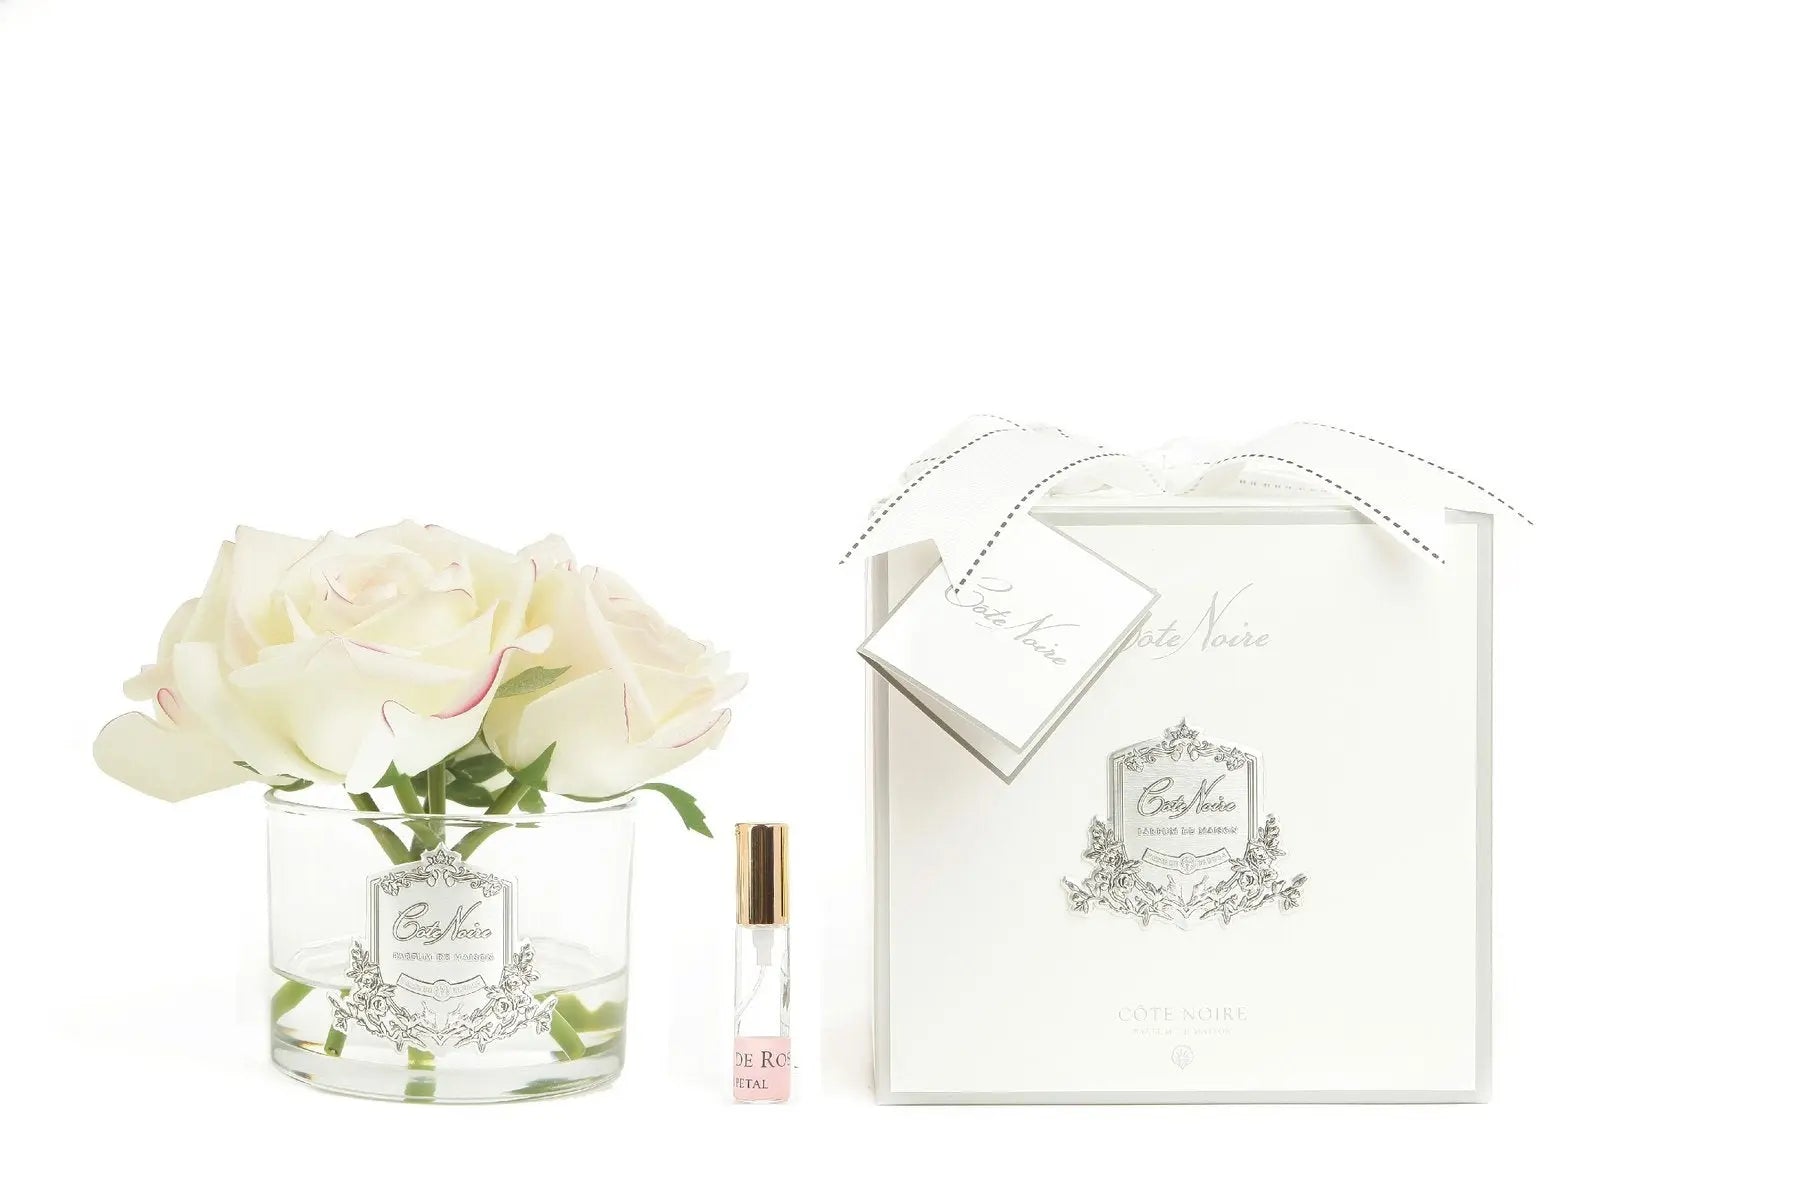 A Cote Noire gift set featuring five artificial pink blush roses in a clear glass vase with a silver crest. Accompanying the vase is a small vial of perfume labeled 'Pétale de Rose' with a gold cap. The items are displayed next to an elegant white gift box adorned with a silver emblem and a white ribbon, creating a refined and luxurious presentation.